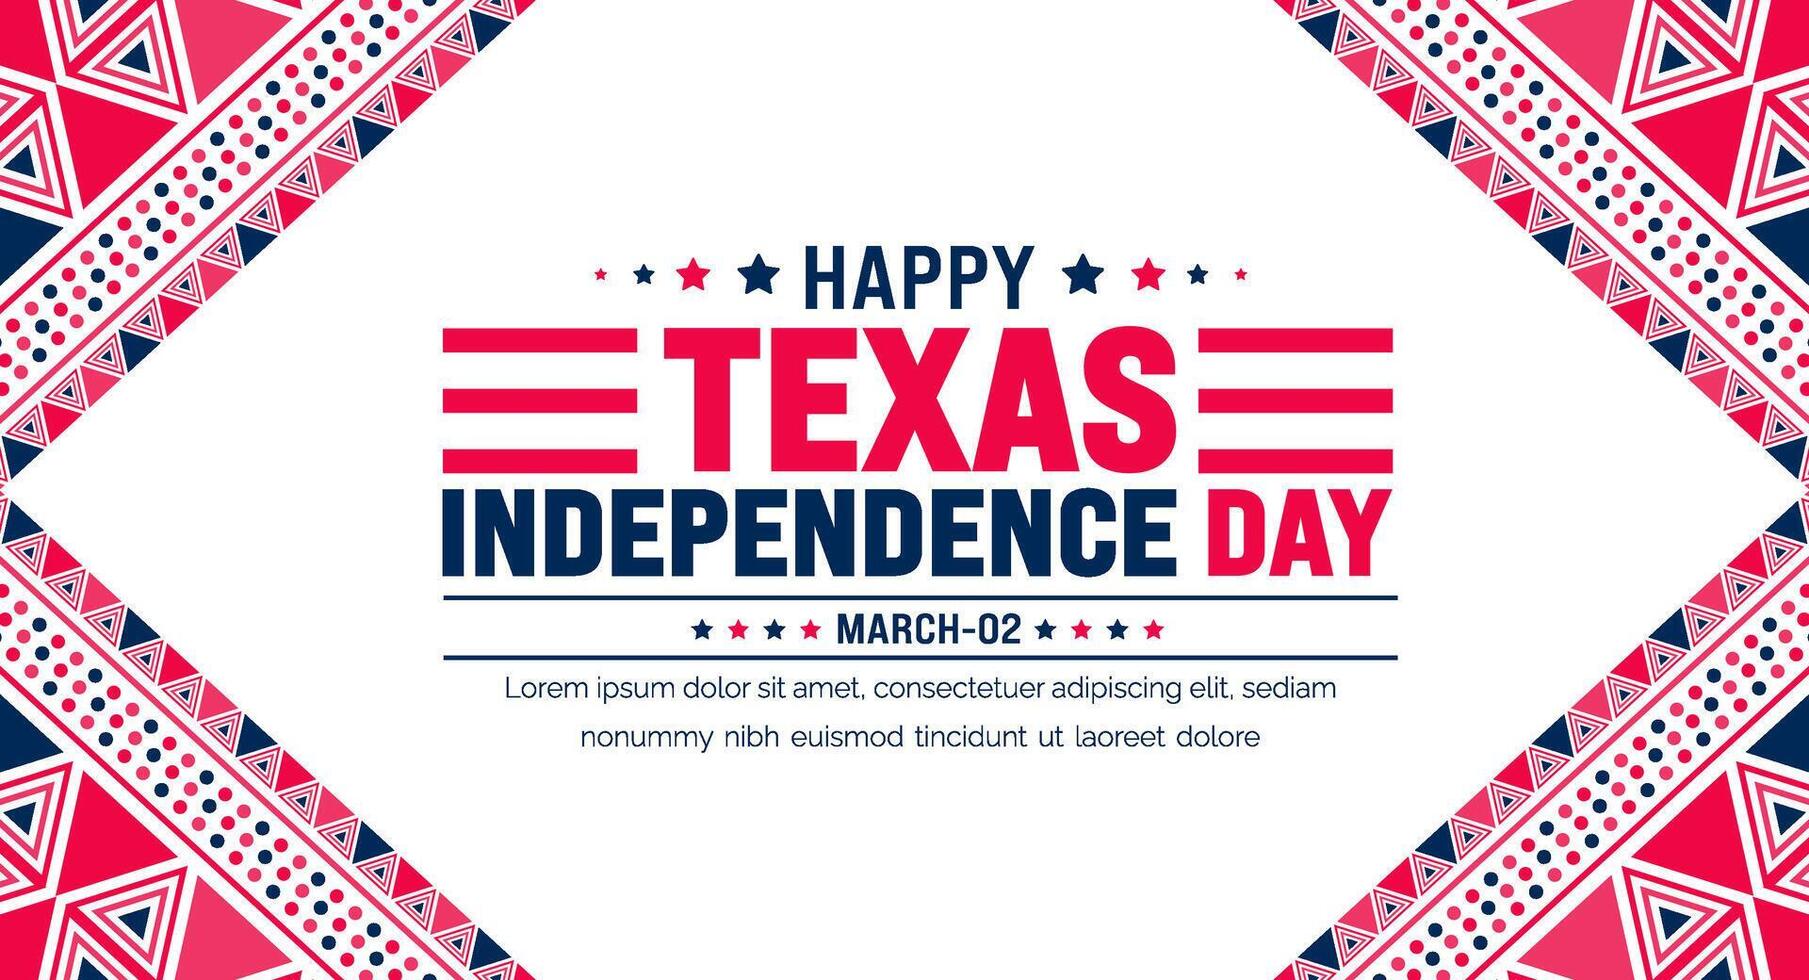 Texas Independence Day background with Texas flag. Texas Independence Day Freedom holiday in United States and celebrated annually in March. vector